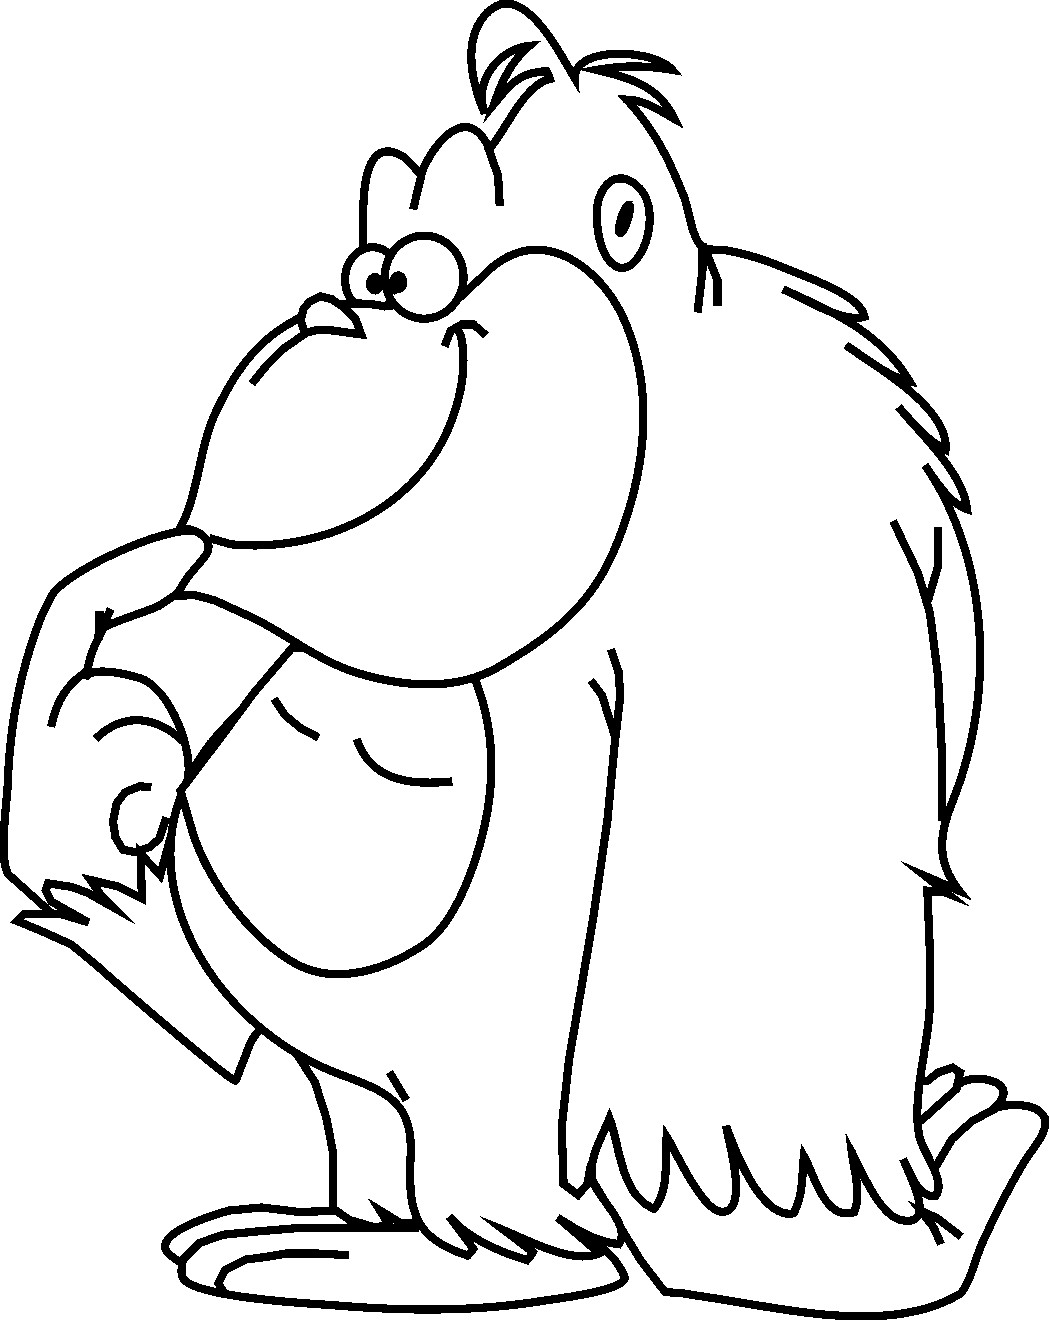 Coloring Pages For Boys Easy
 animal cartoon coloring pages